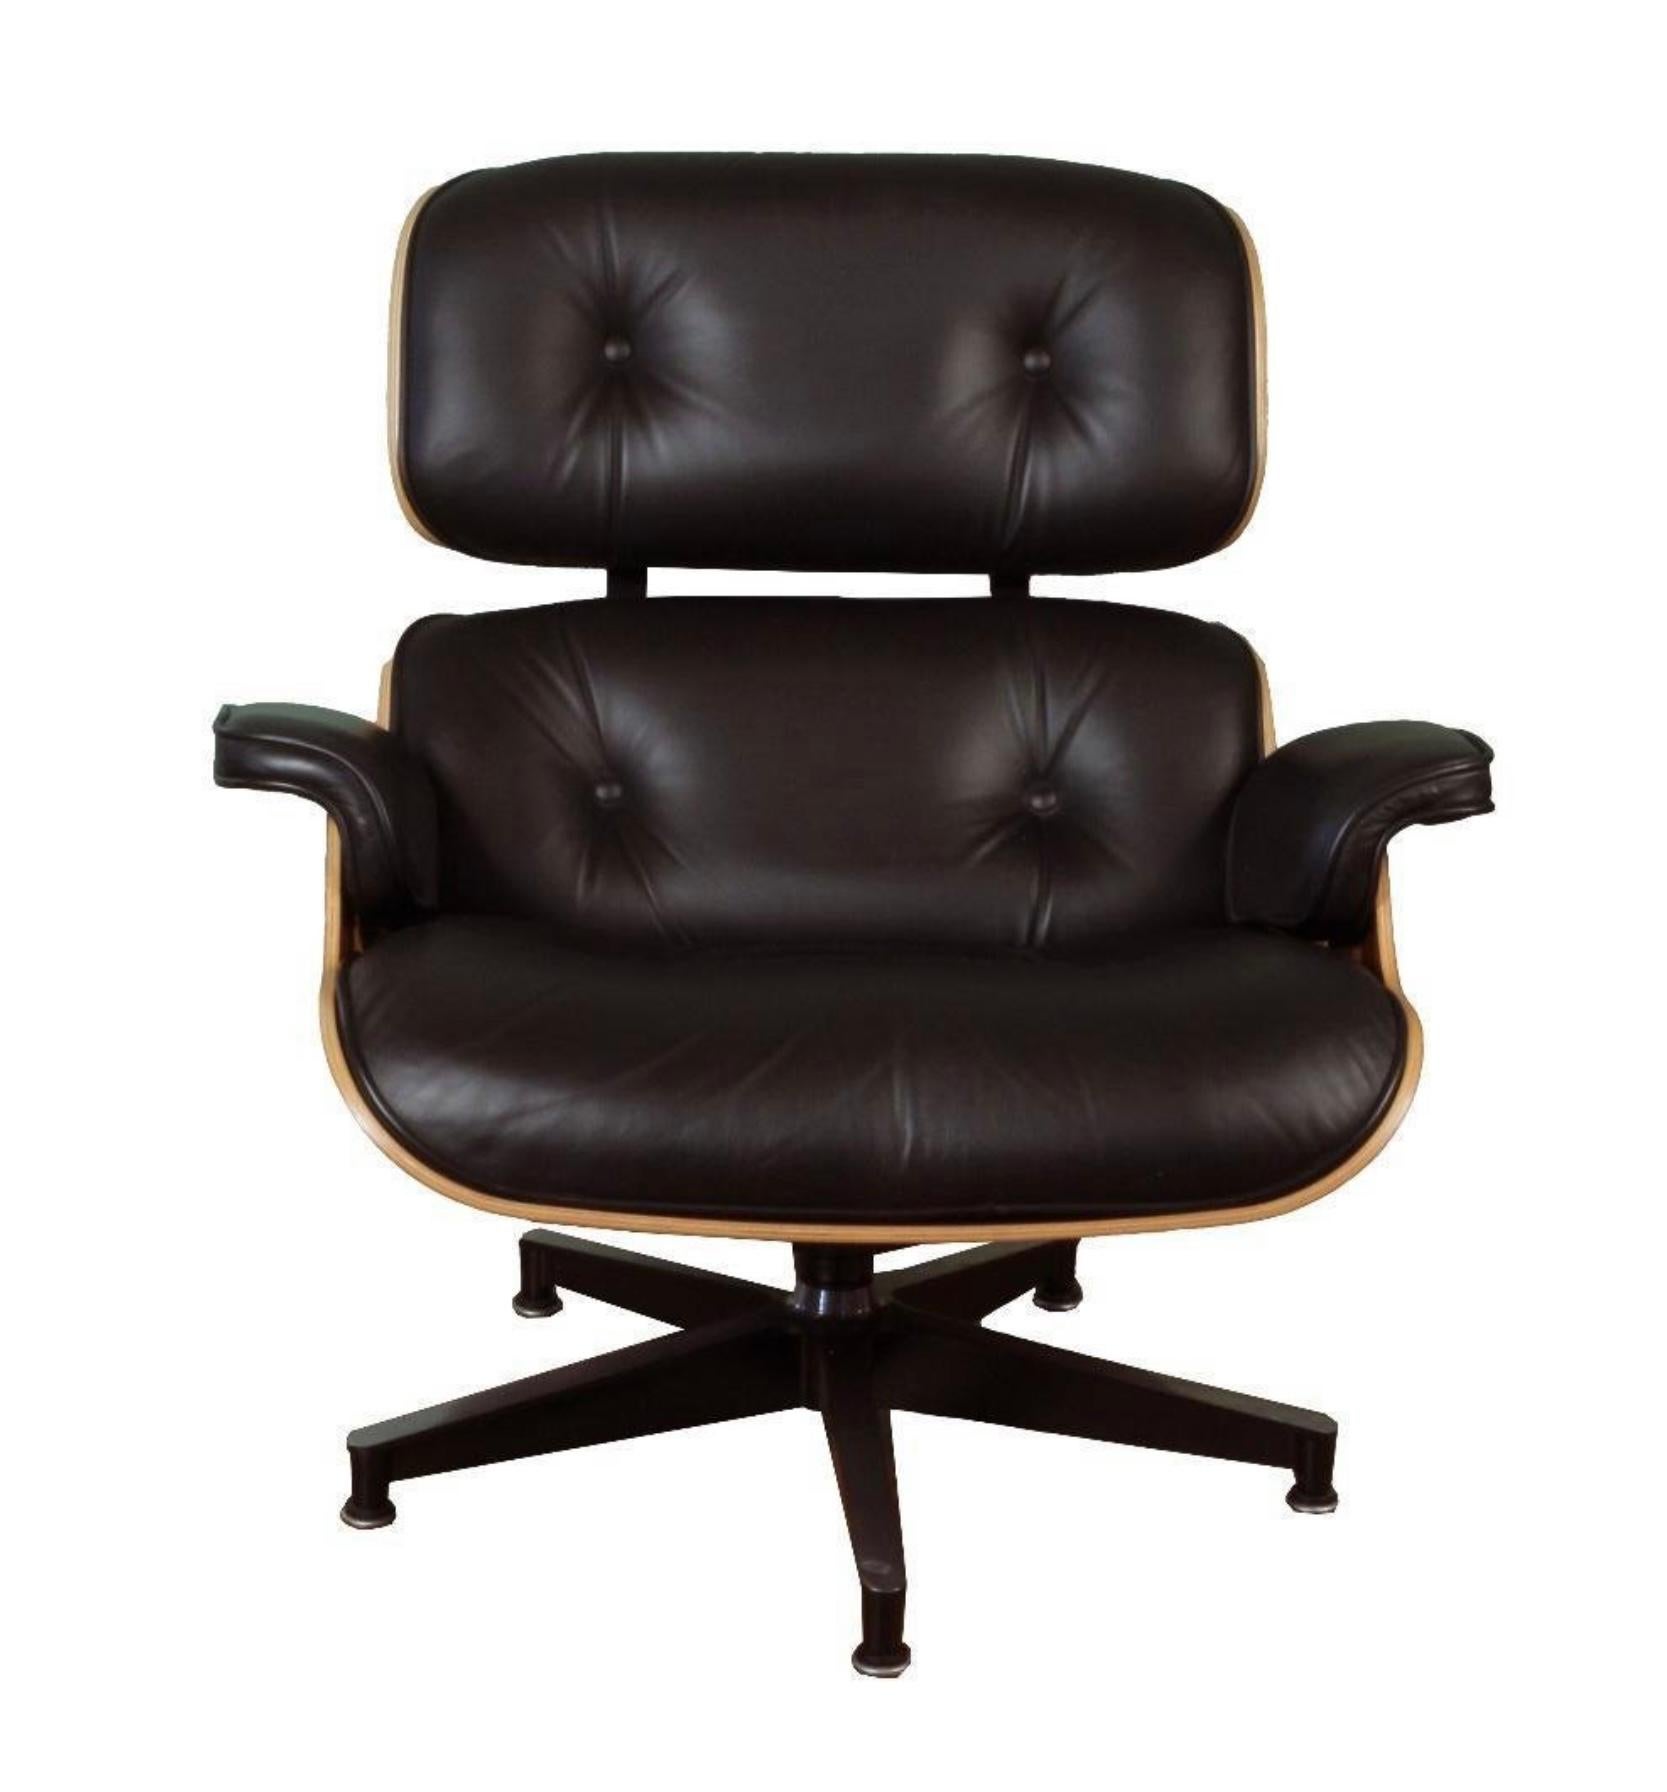 Beautiful Herman Miller Eames chair and ottoman in a beautifully grained palisander shell.  Black leather cushions. The chair has delivery dates of 4/16/202008 and 4/21/2008 on the bottom sticker. In very good overall condition, with some minor